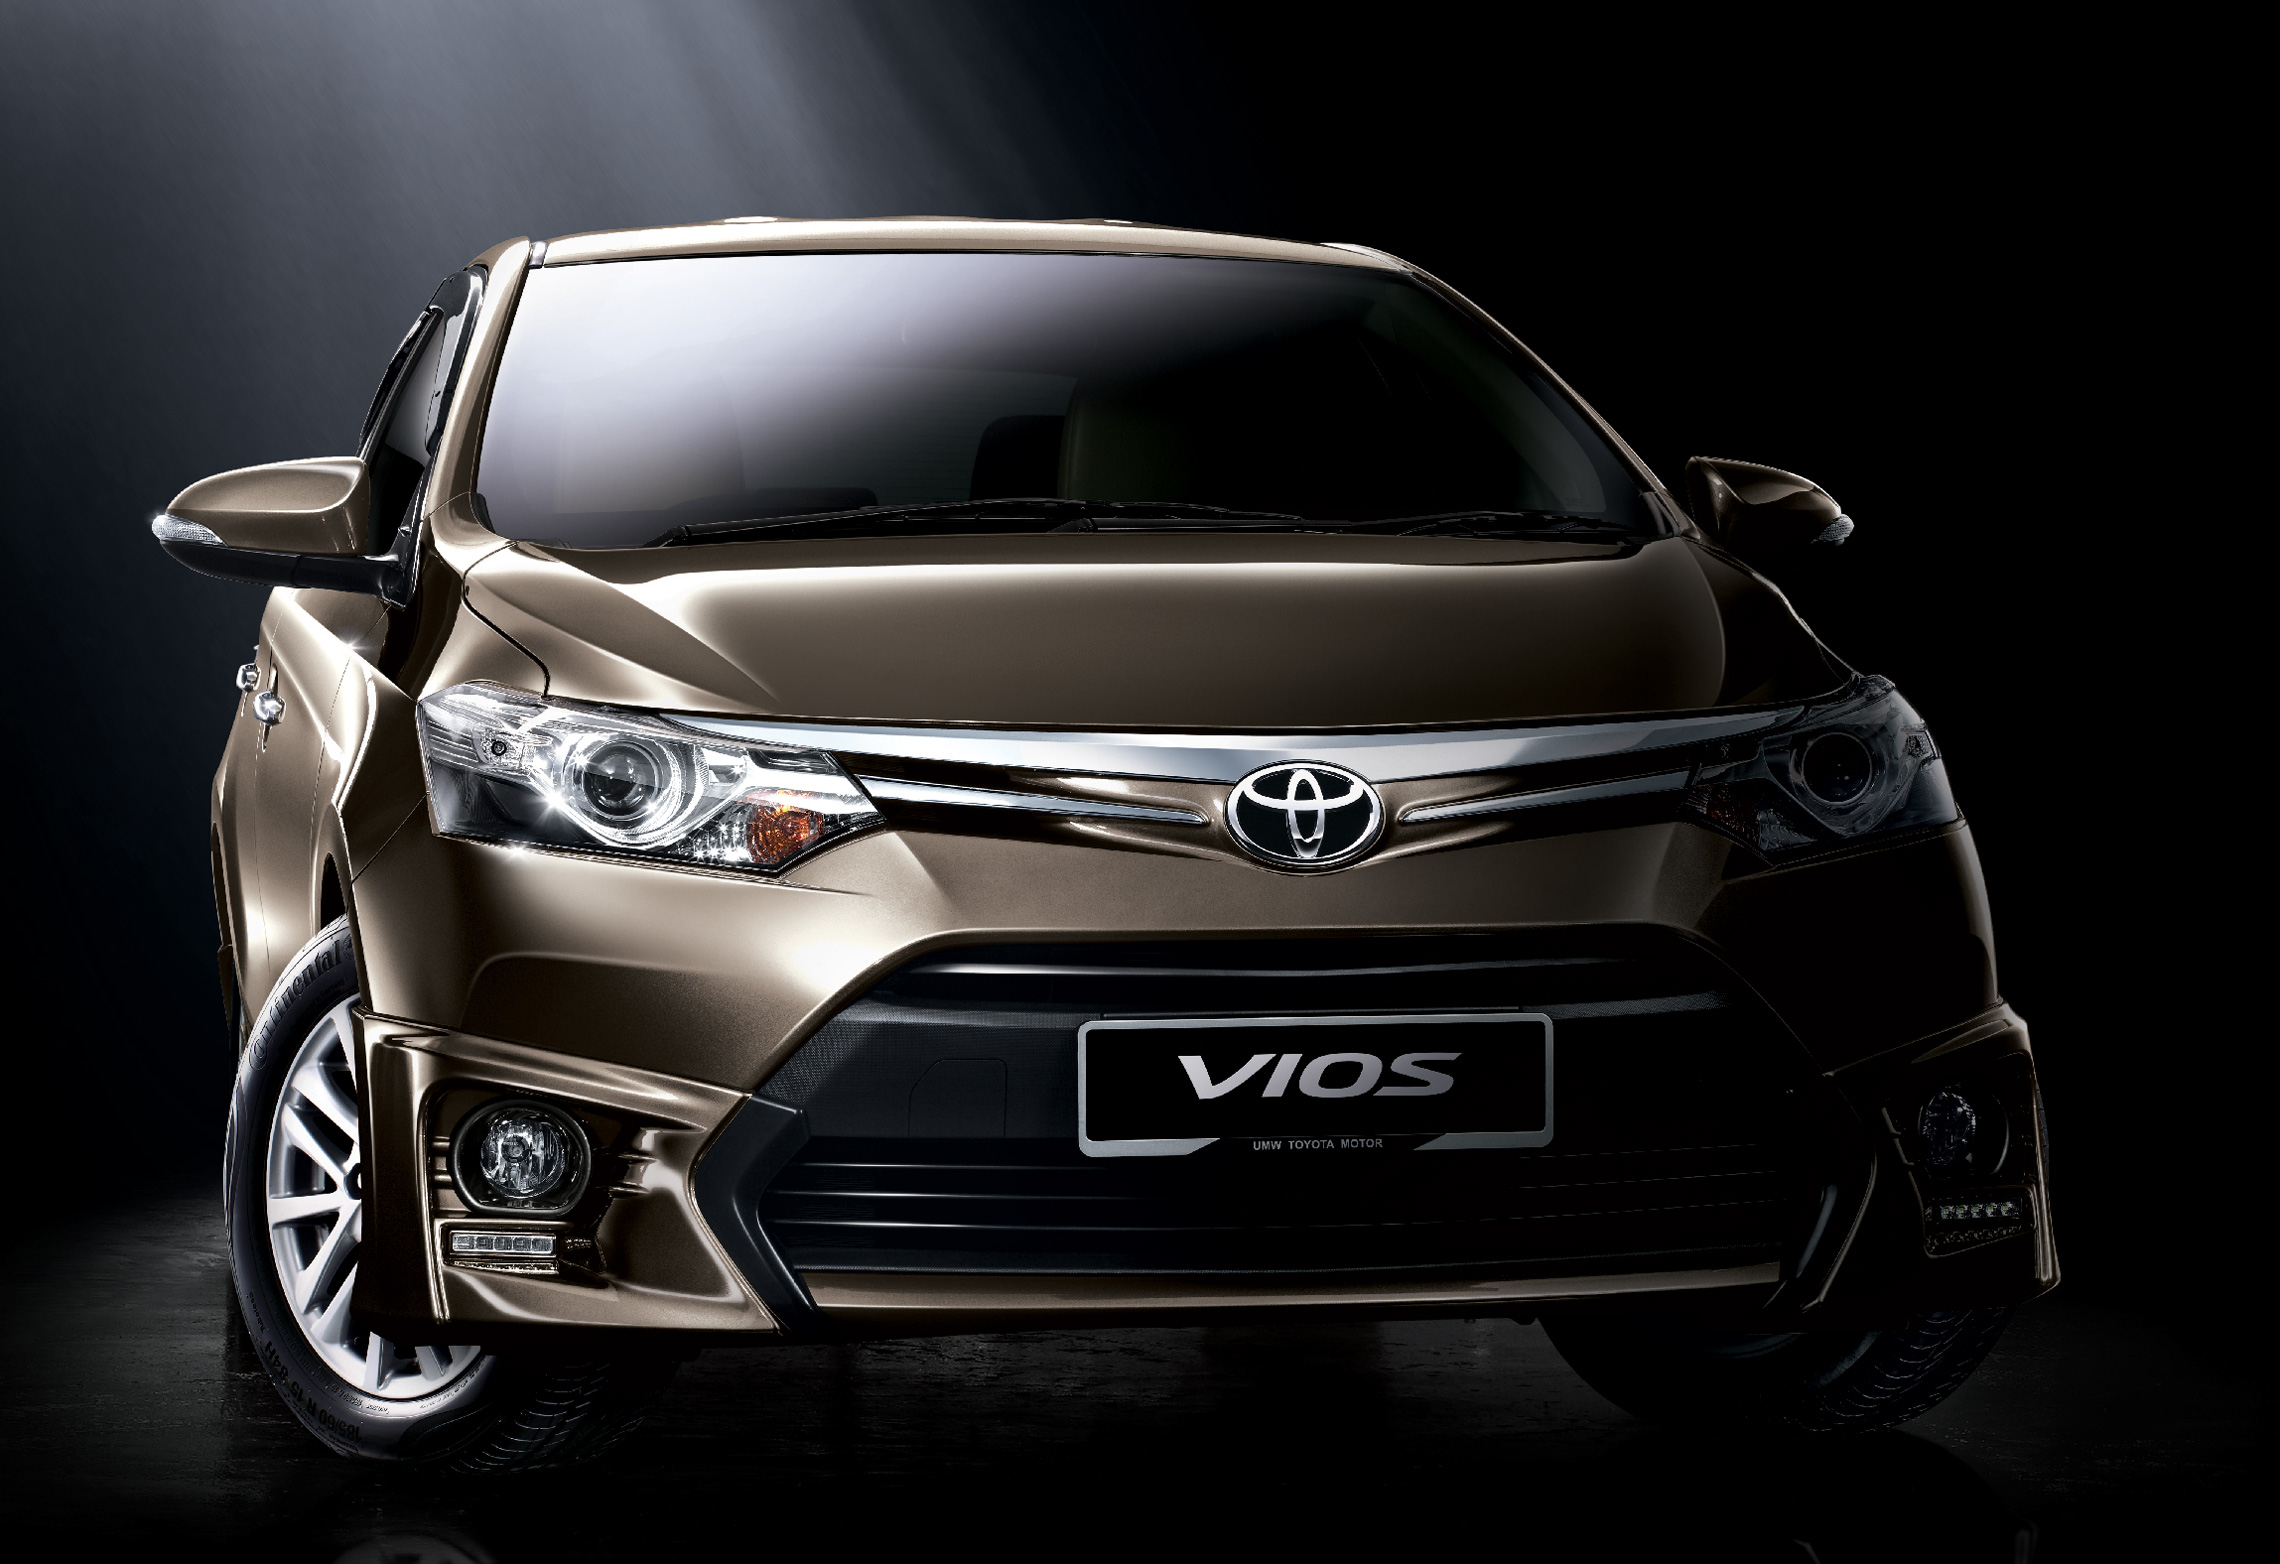 2013 Toyota Vios - spot and snap, and maybe a preview too